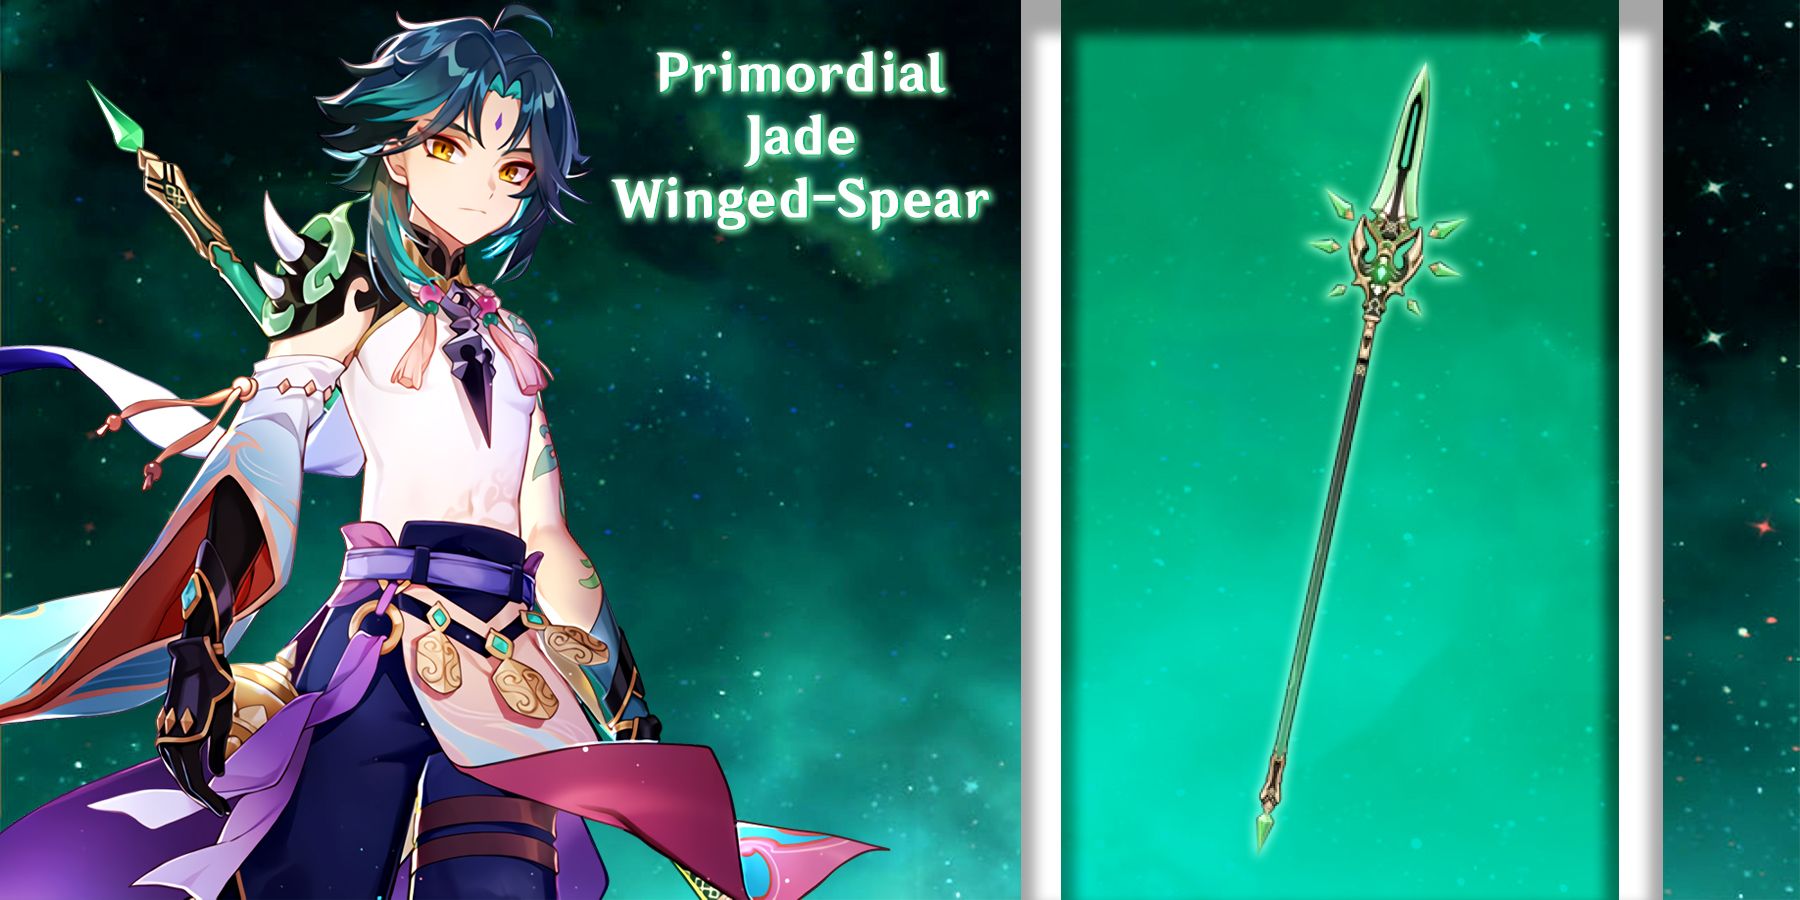 xiao using primordial jade winged-Spear in genshin impact